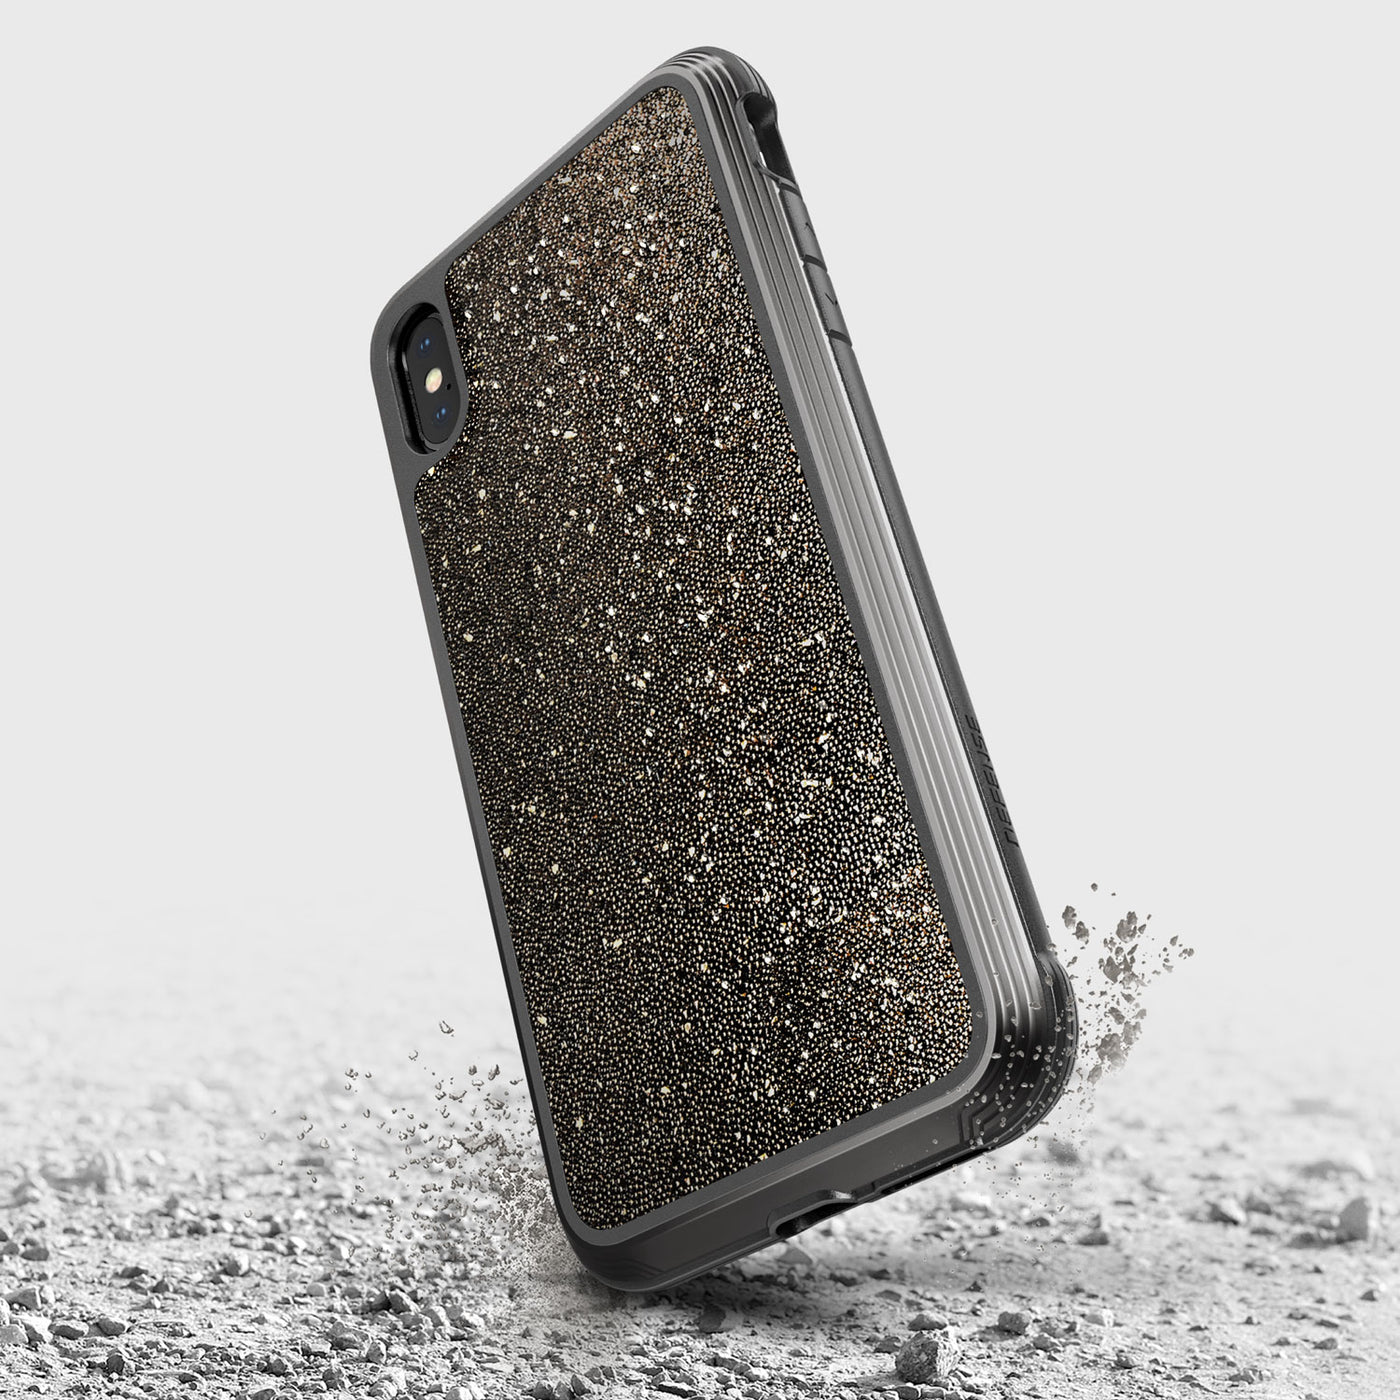 Luxurious Case for iPhone XS Max. Raptic Lux in dark glitter.